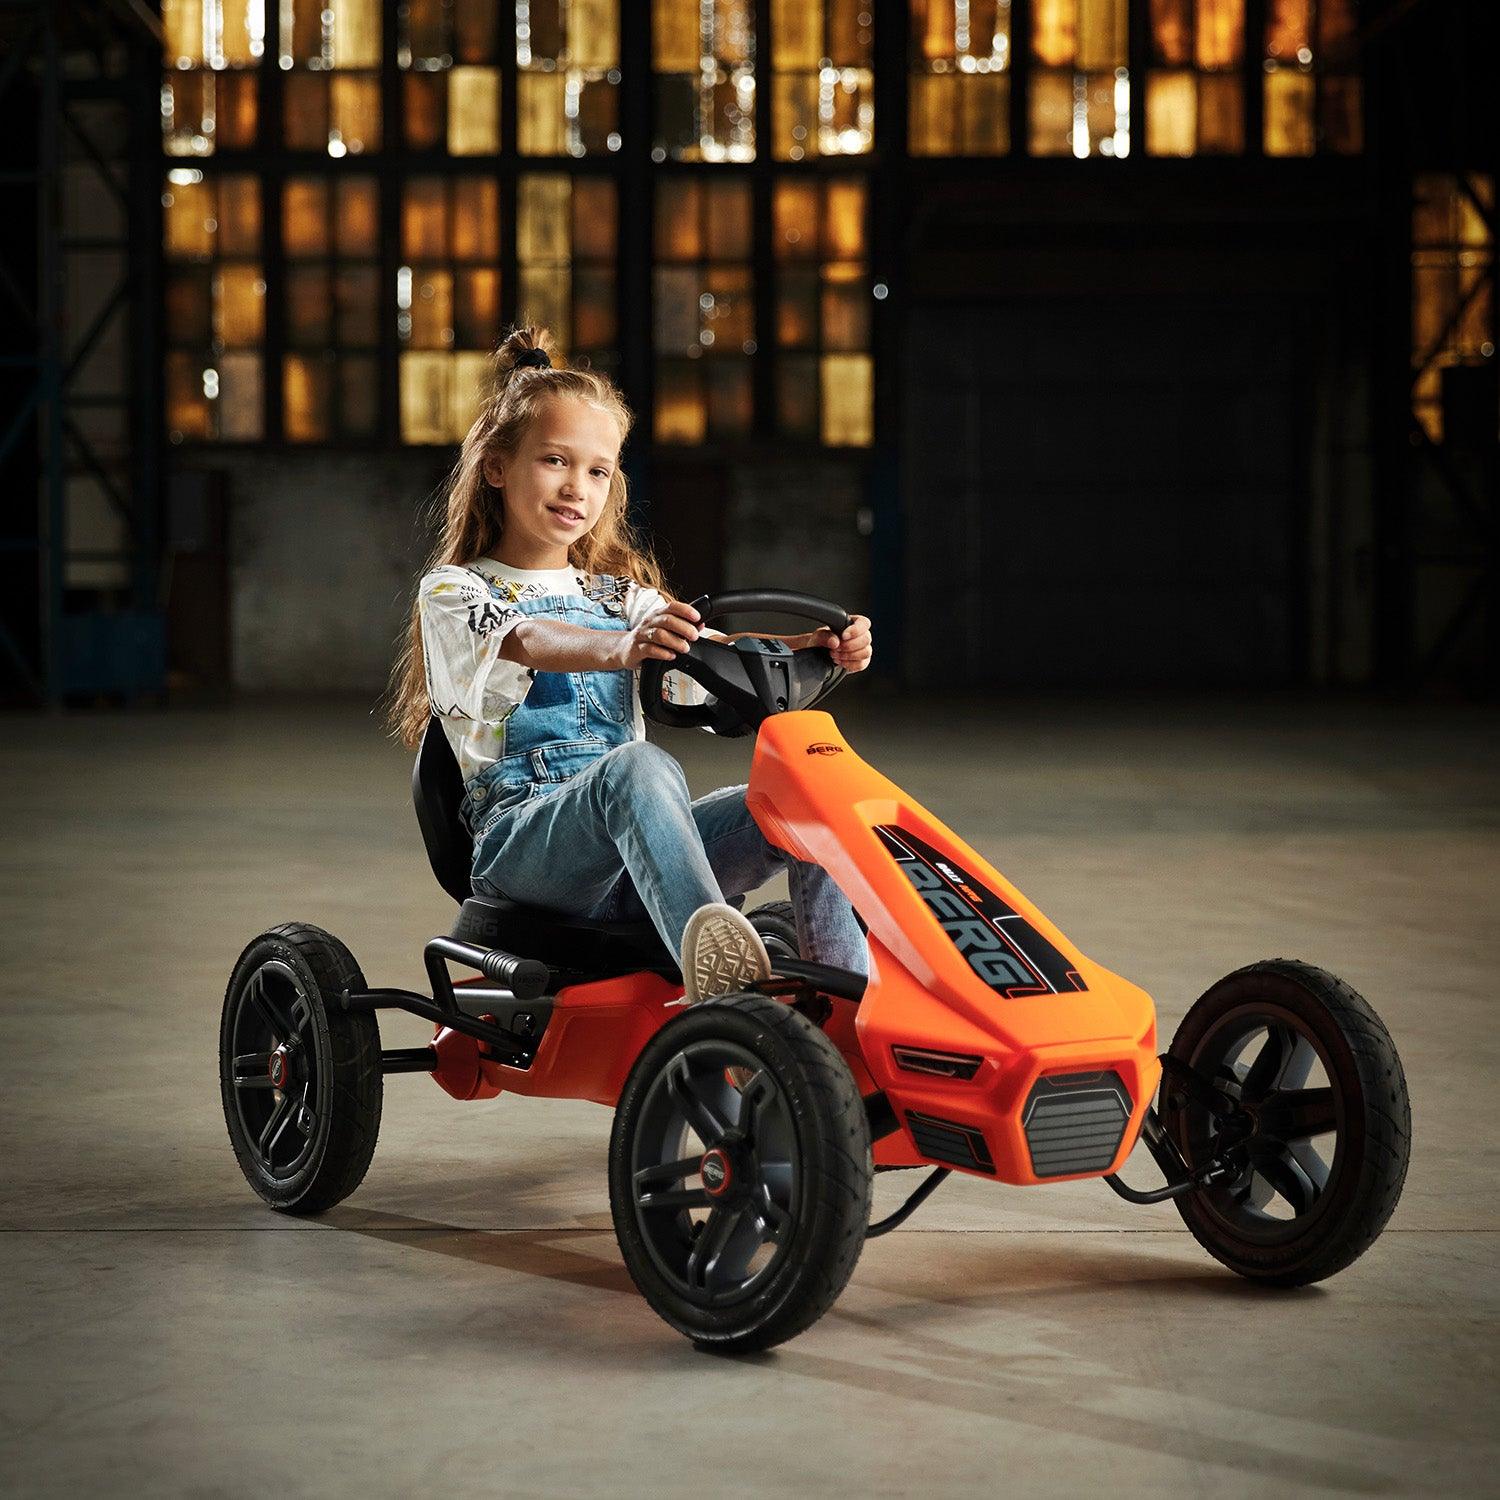 BERG Rally DRT Green Pedal Kart (Age 4-12) – River City Play Systems